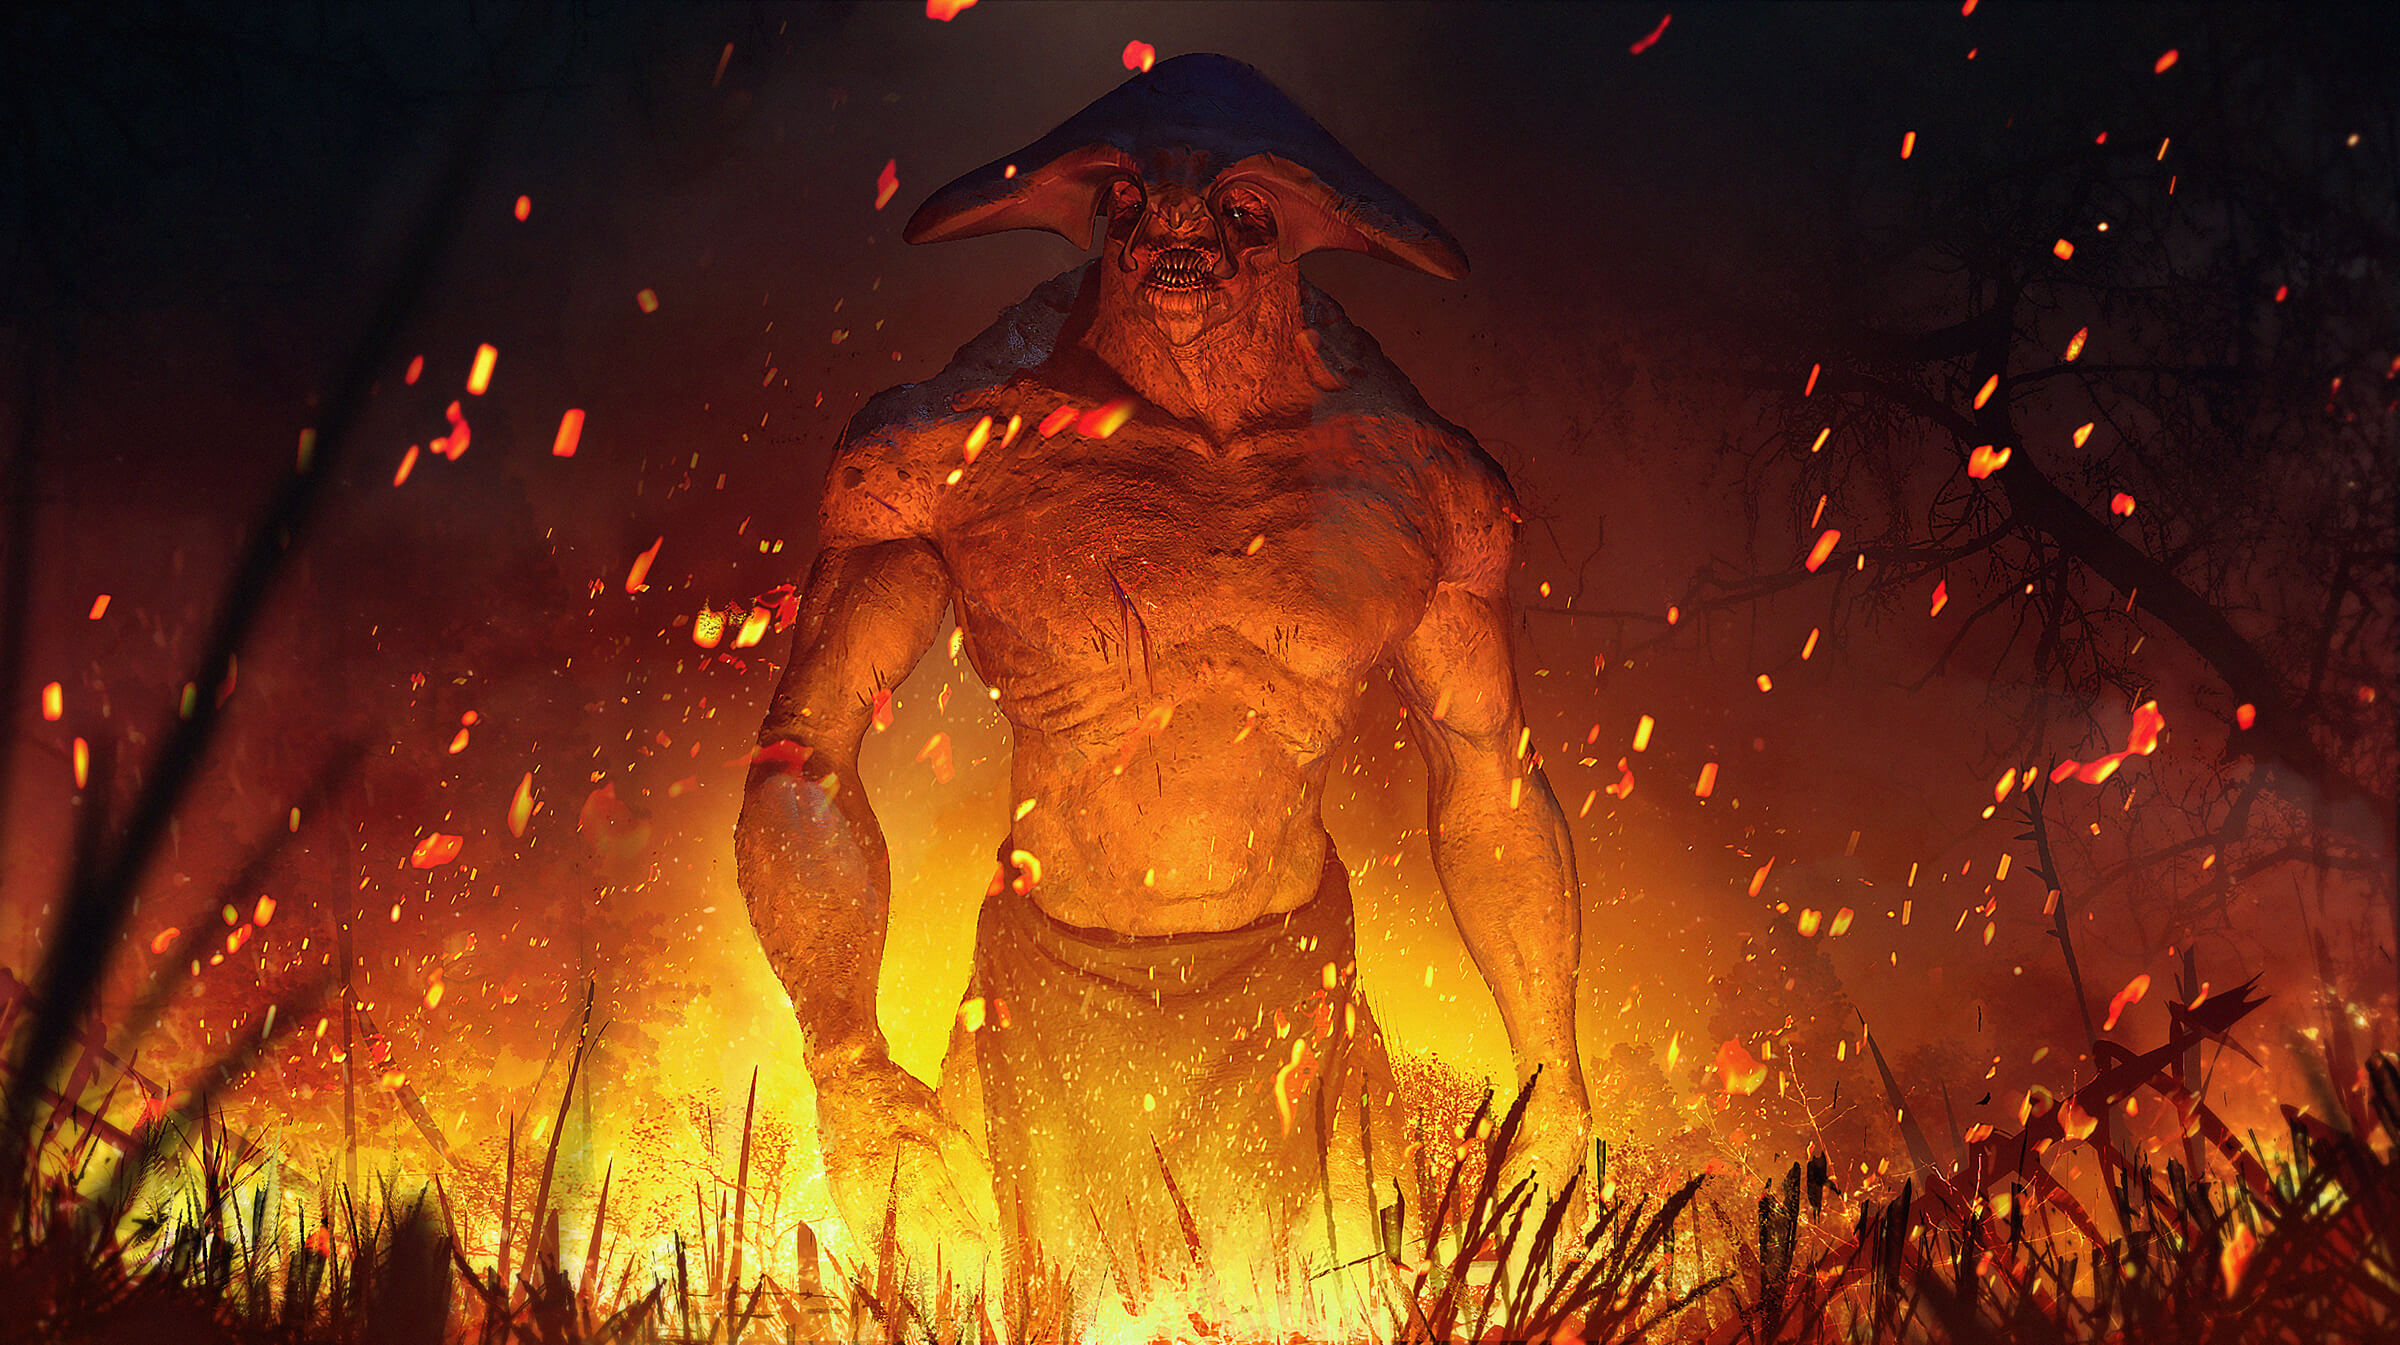 A large man-like creature with a winged bony head piece stands in fire